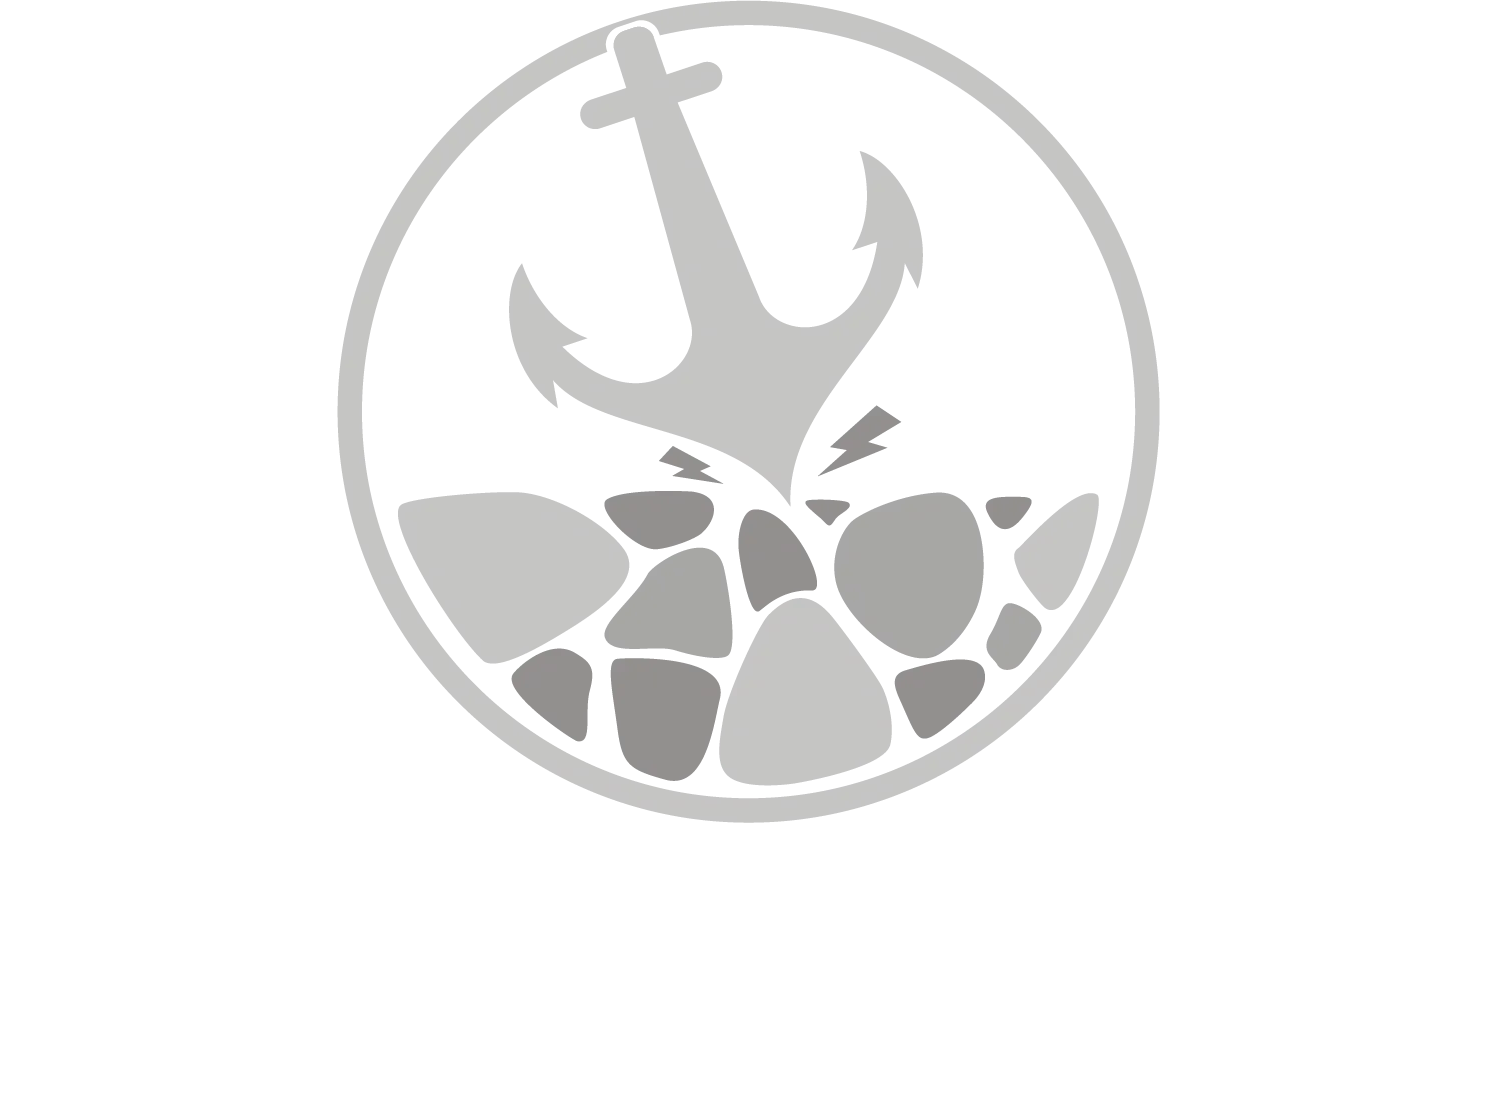 A black and white logo with an anchor and rocks in a circle.